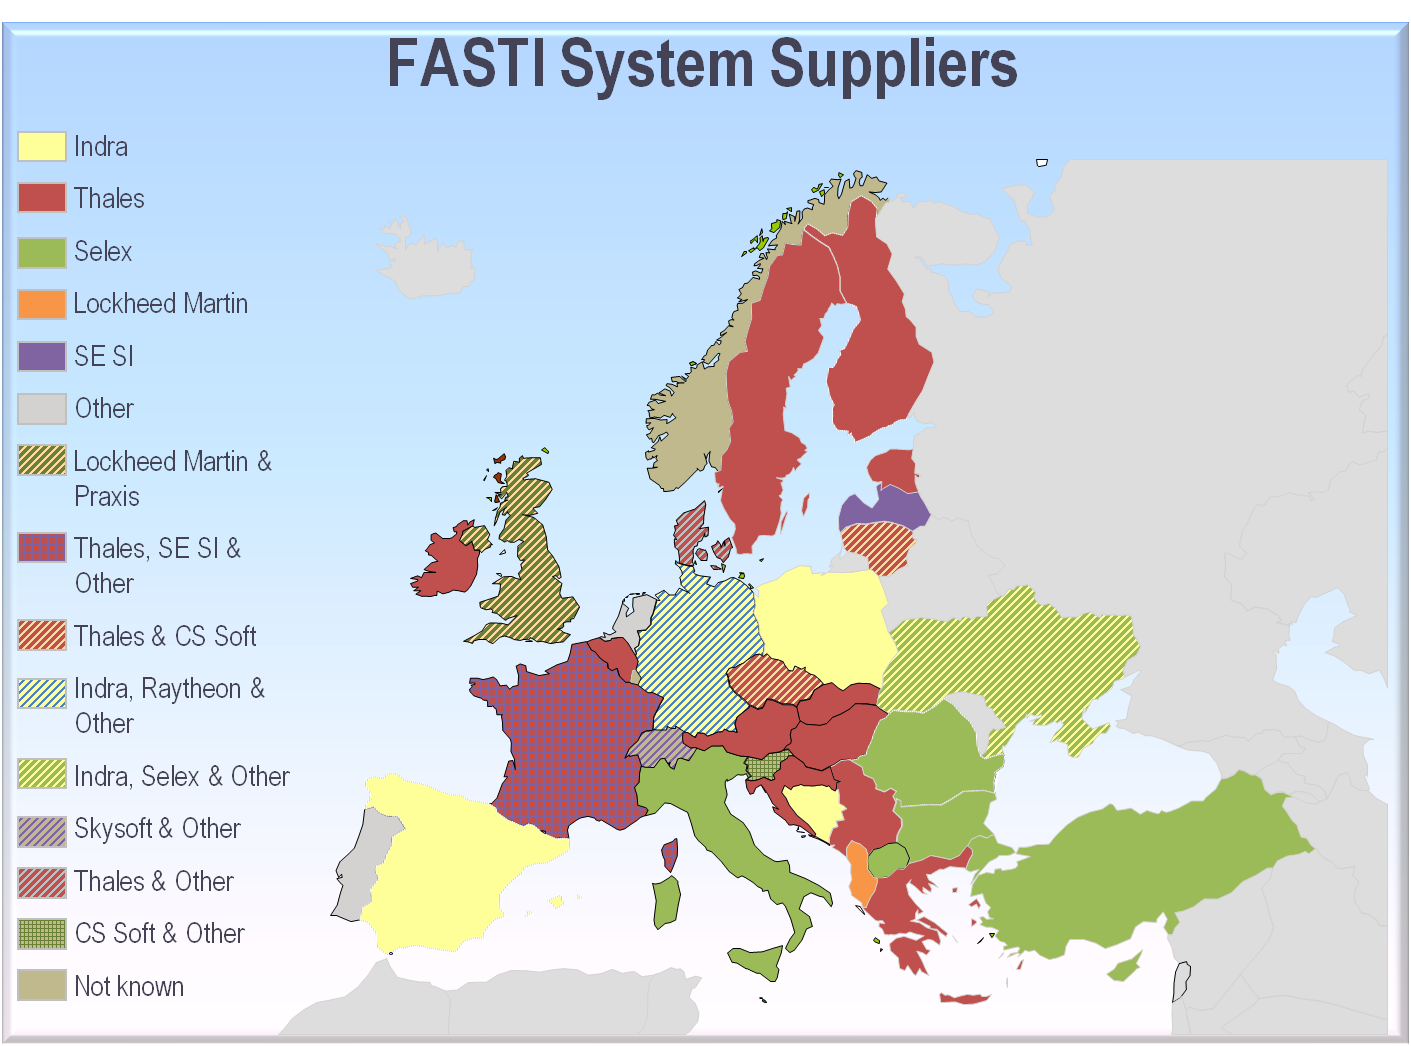 FASTI system suppliers (4)